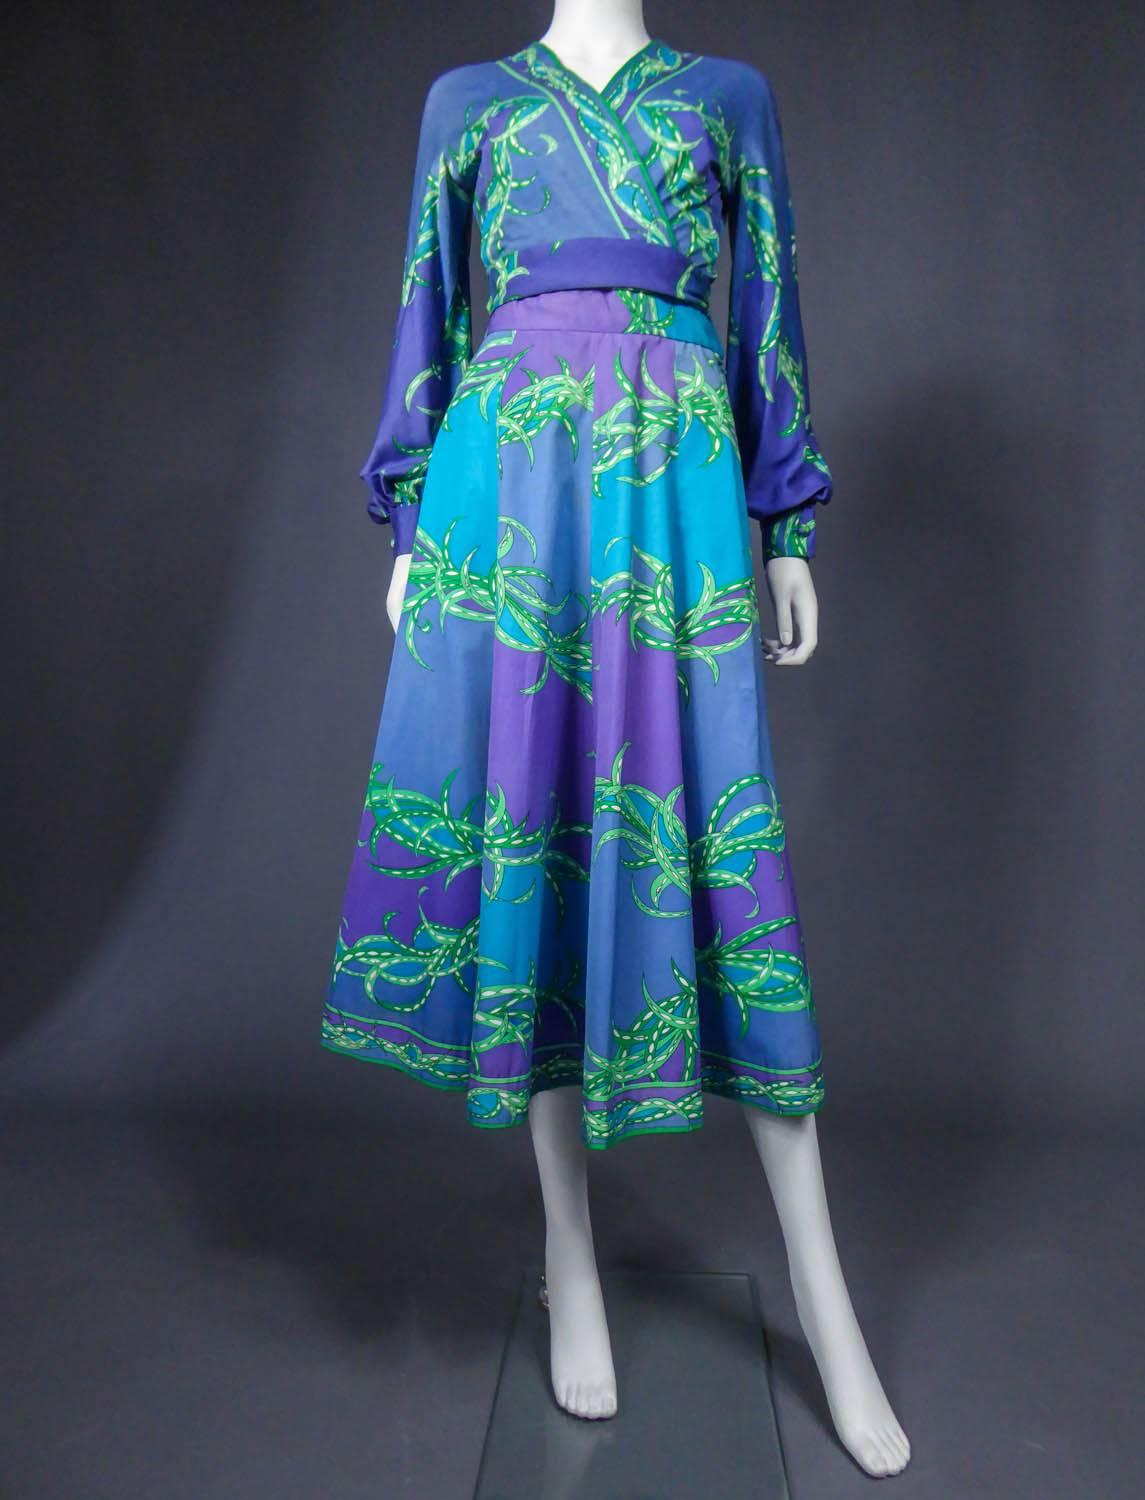 Circa 1970 - 1980

Italy

Bolero and skirt set Emilio Pucci from the 70s / 80s. Brassière bolero in stretch lycra cotton. V neckline, the bolero crosses in front to tie with the belt in the back. Kimono sleeves with triangle under the armpits and 